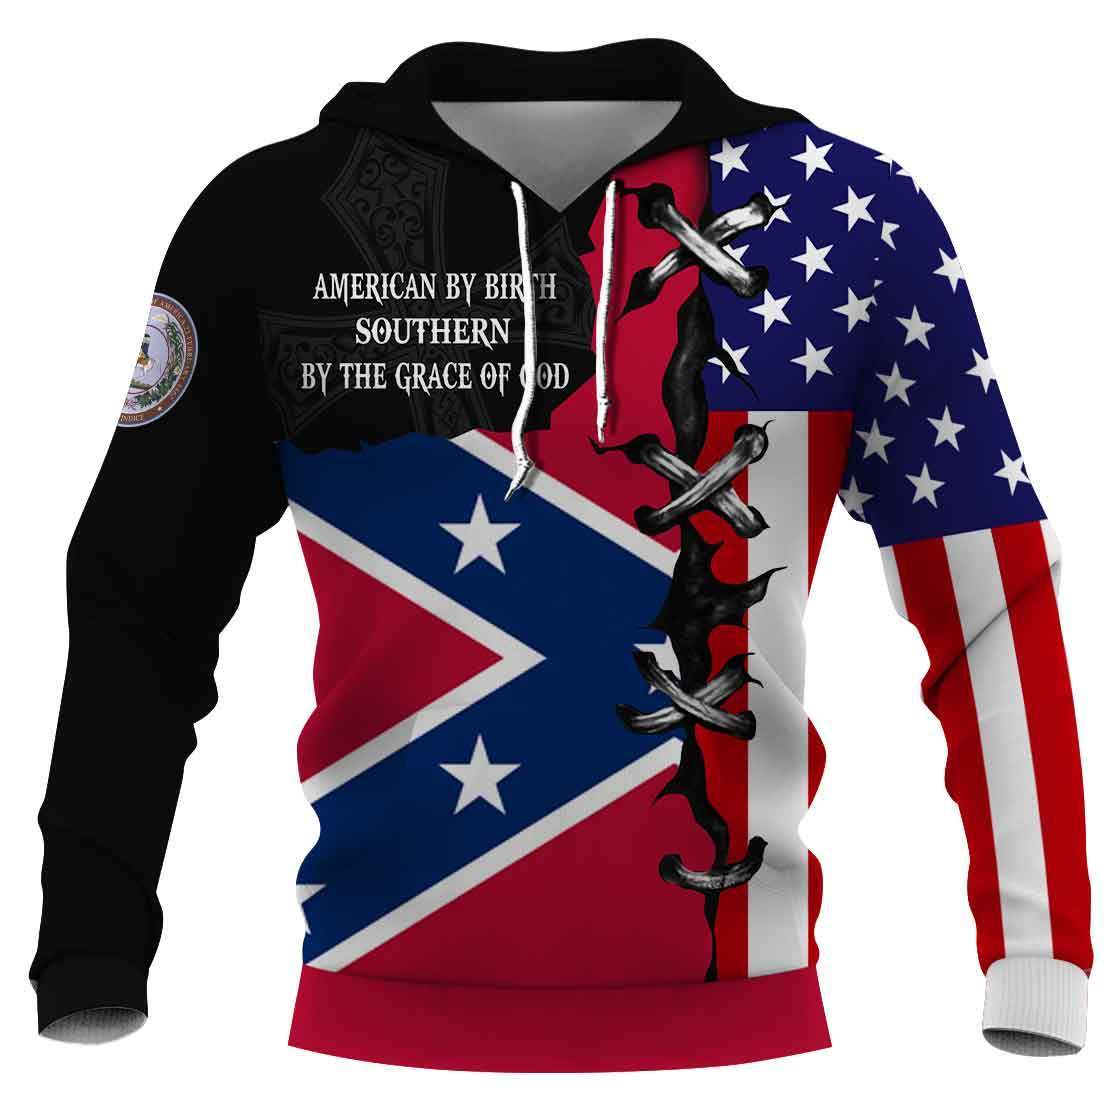 American by birth southern by the grace of god full printing shirtAmerican by birth southern by the grace of god full printing hoodie